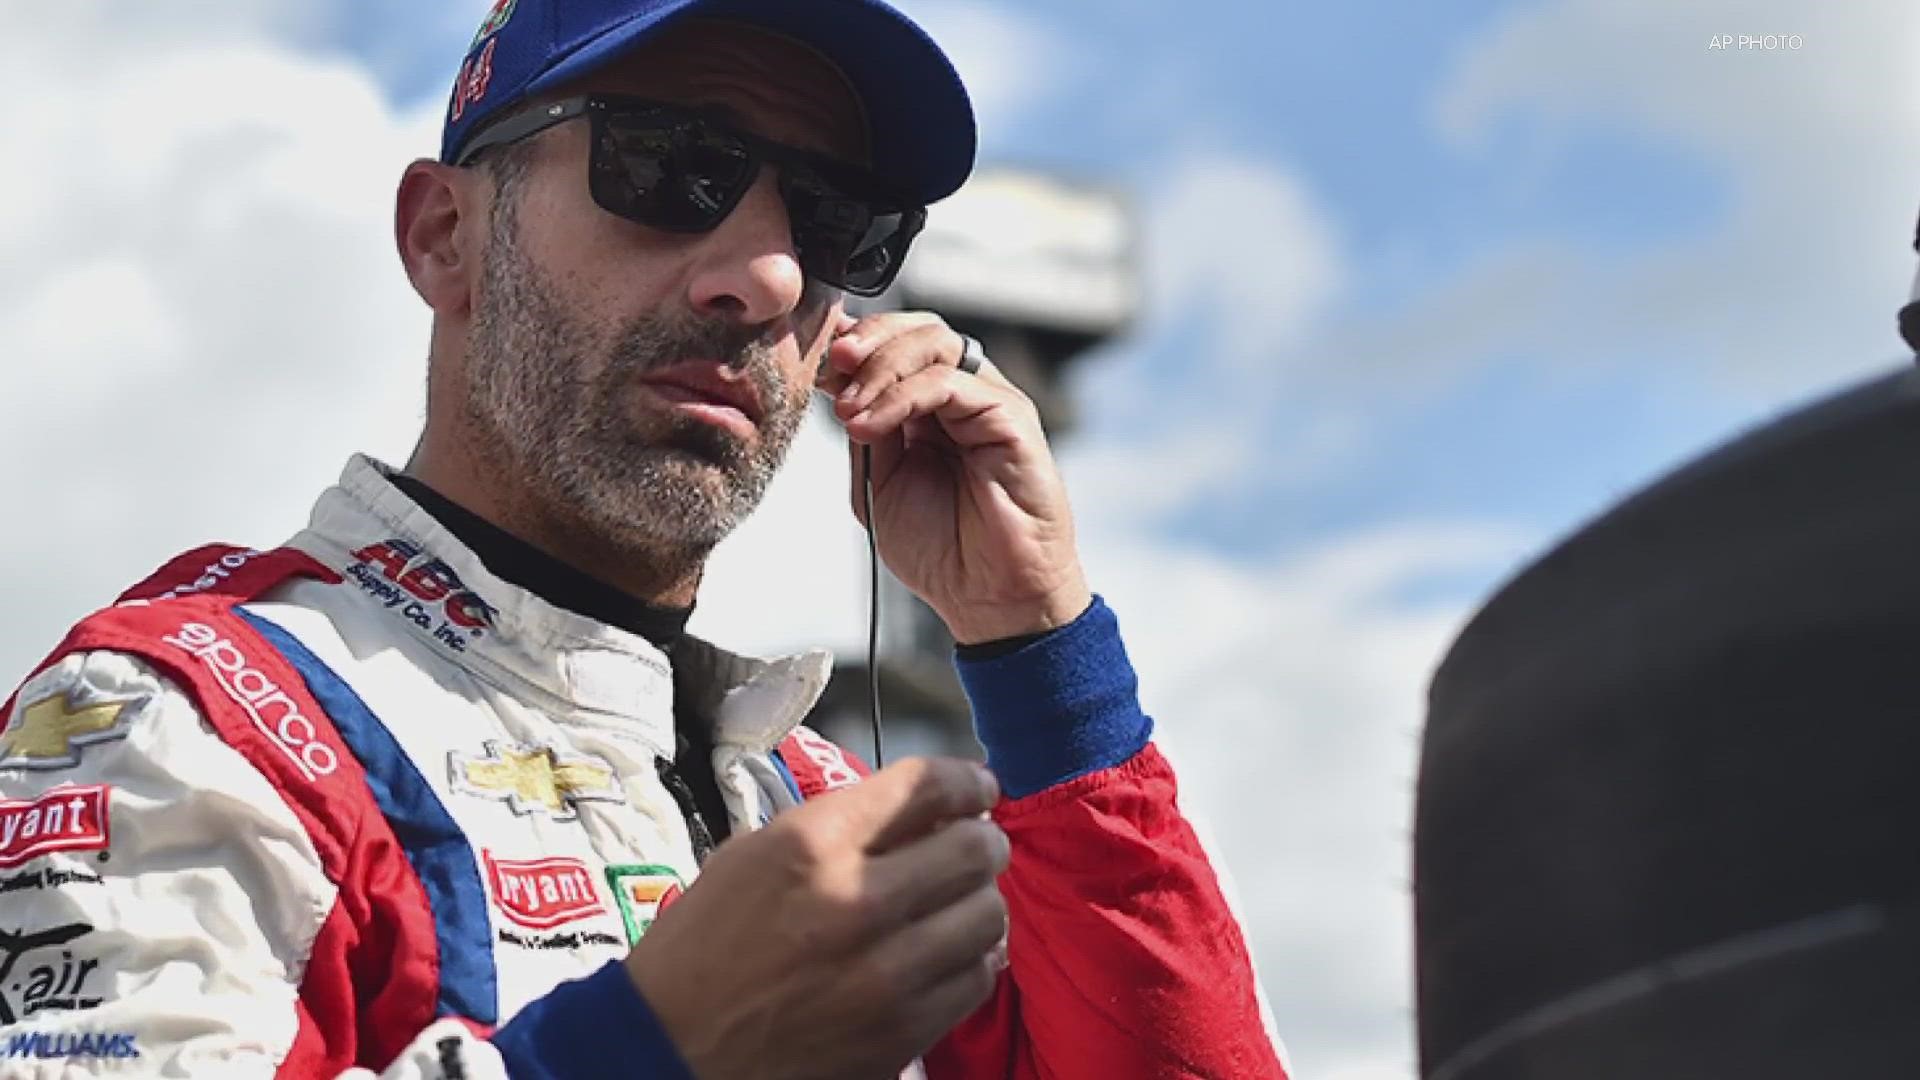 The 48 year old Kanaan says he will retire again after this year's Indy 500